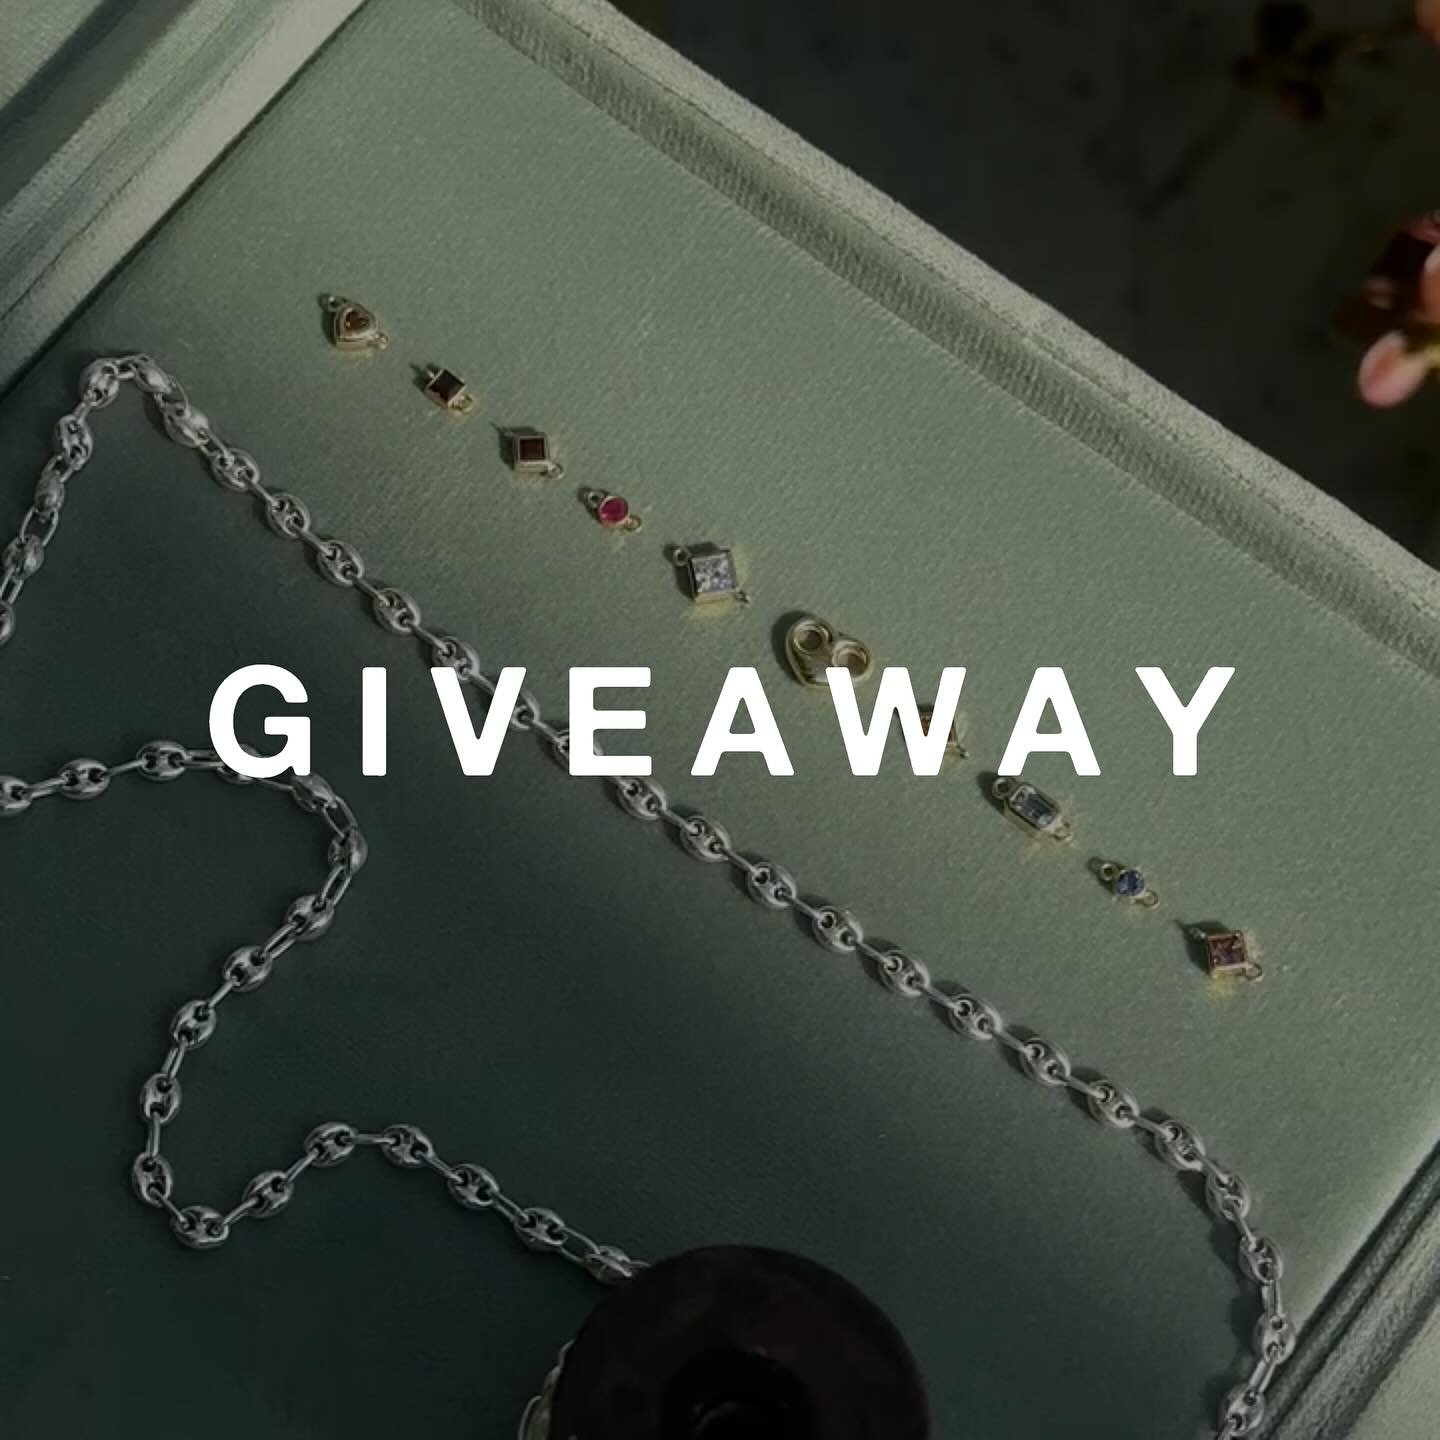 🌟 🌟 🌟 🌟 G I V E A W A Y  T I M E 🌟 🌟 🌟 🌟

Can you guess which beloved celebrity we&rsquo;ve designed this custom family gemstone bracelet for?? Enter to win a $500 LOVE SARO gift card by guessing who it is! 

GUIDELINES TO ENTER:

🌟 Tag your